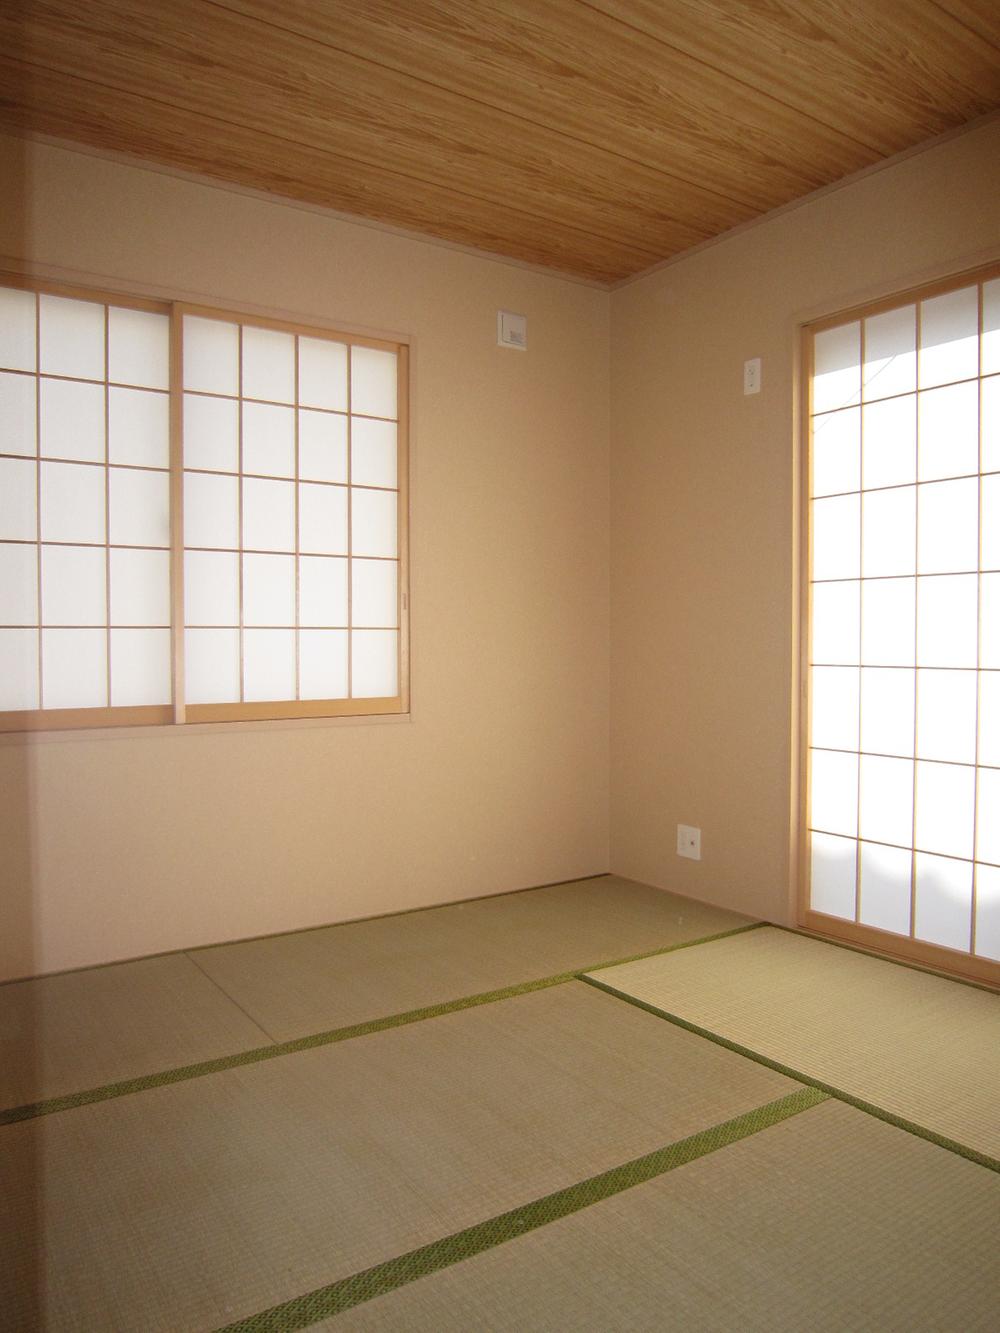 Other introspection. 1F Japanese-style room ☆ 